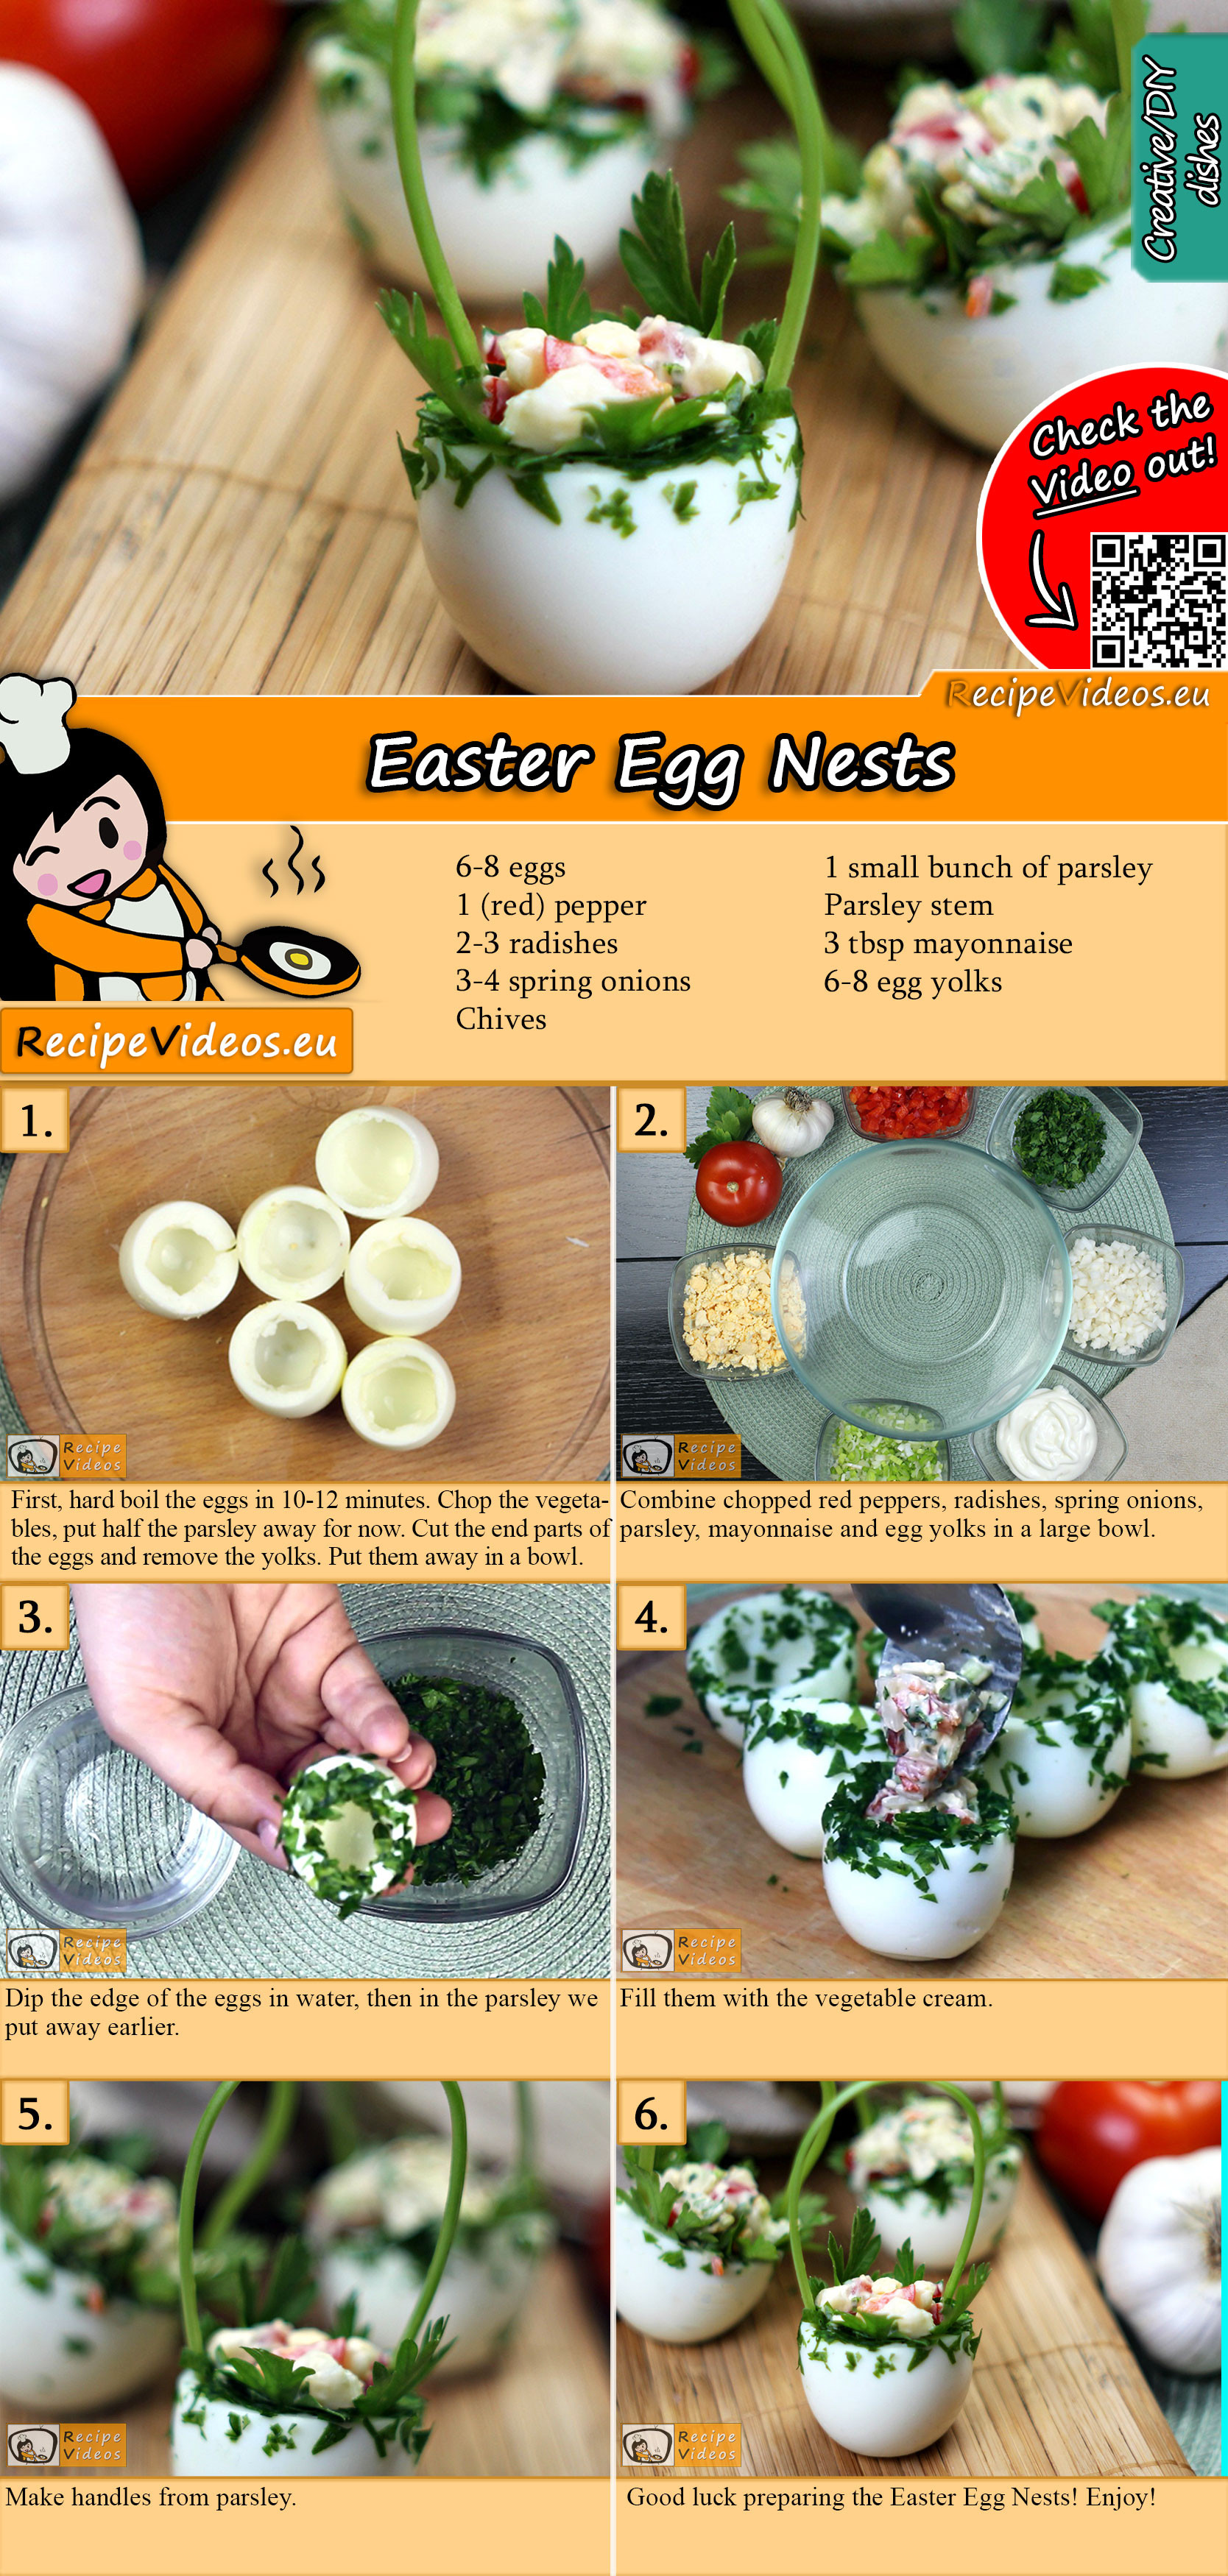 Easter egg nests recipe with video